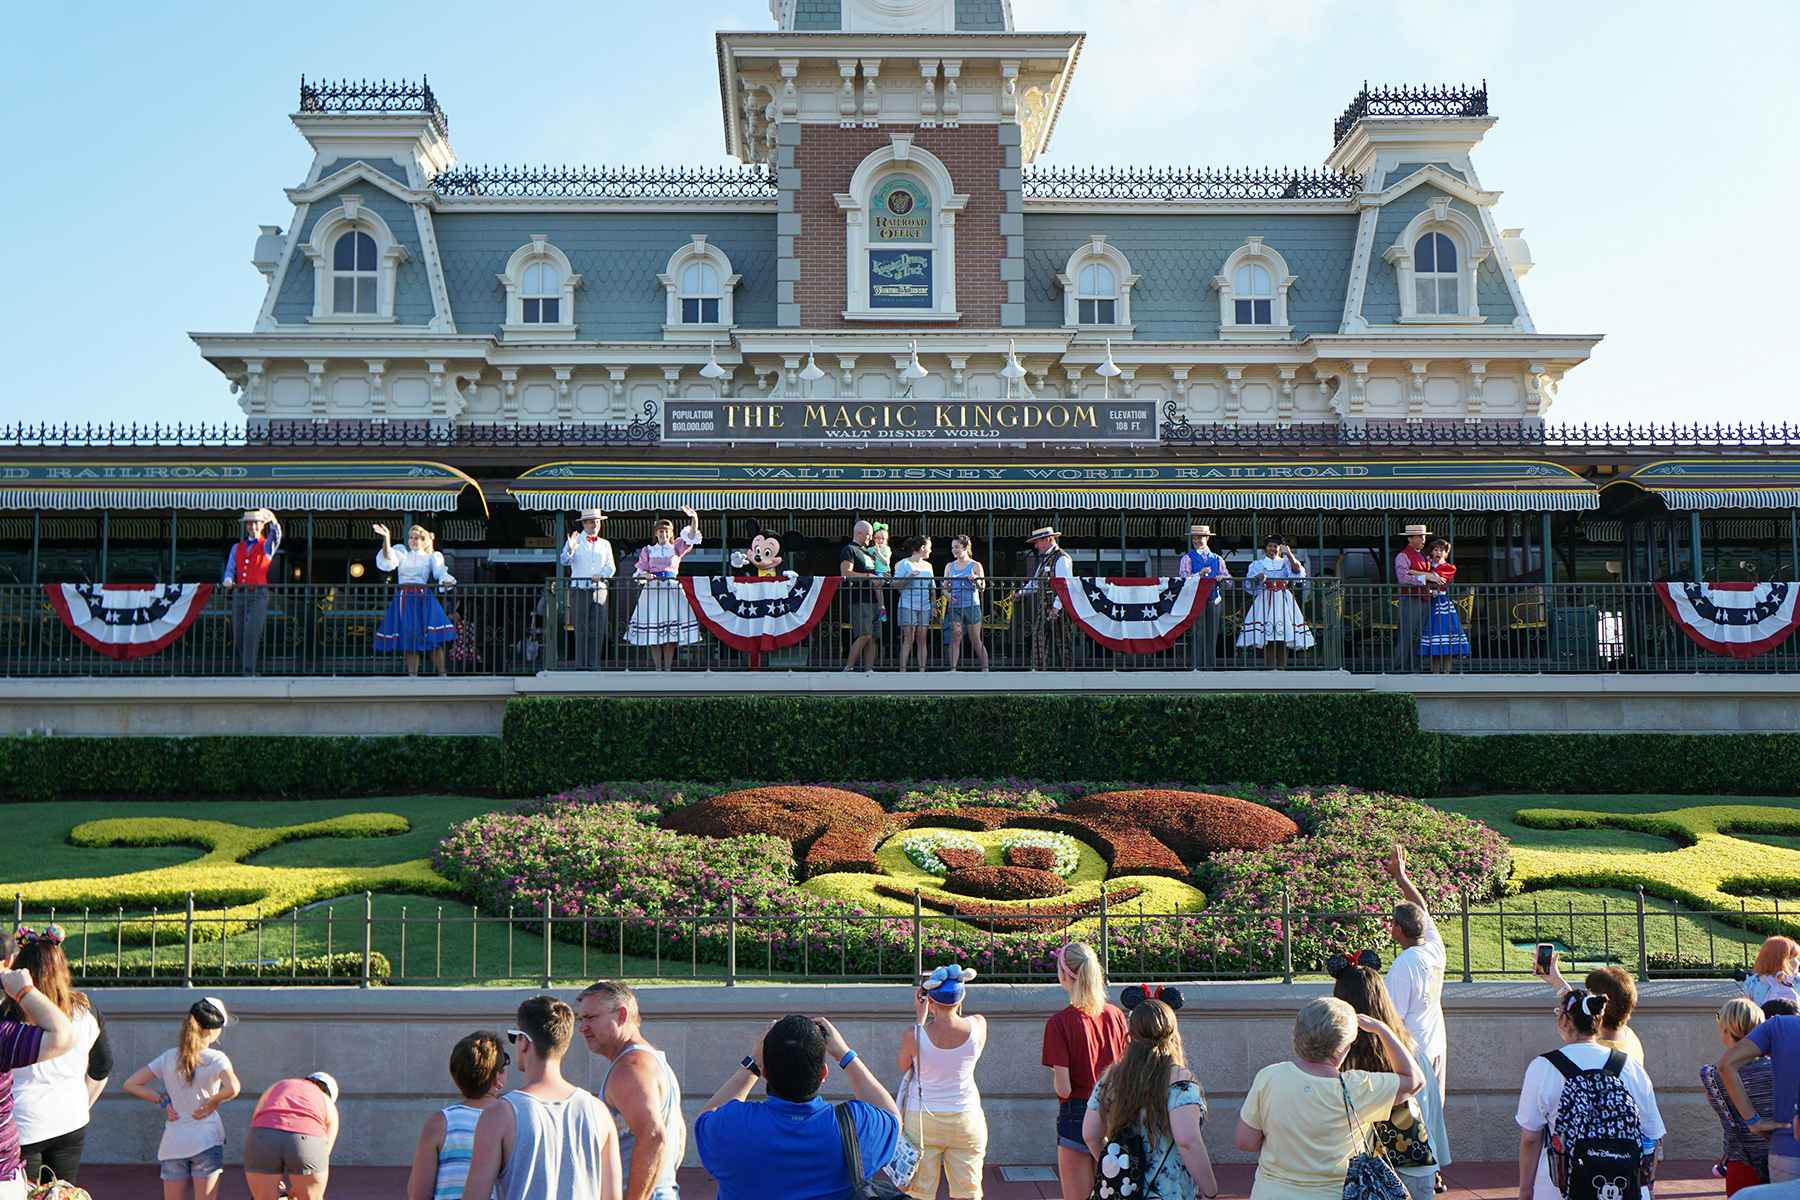 The train station building with America flag buntings and the Mickey Mouse head in the flower bed at the front of the Disney Magic Kingdom park.